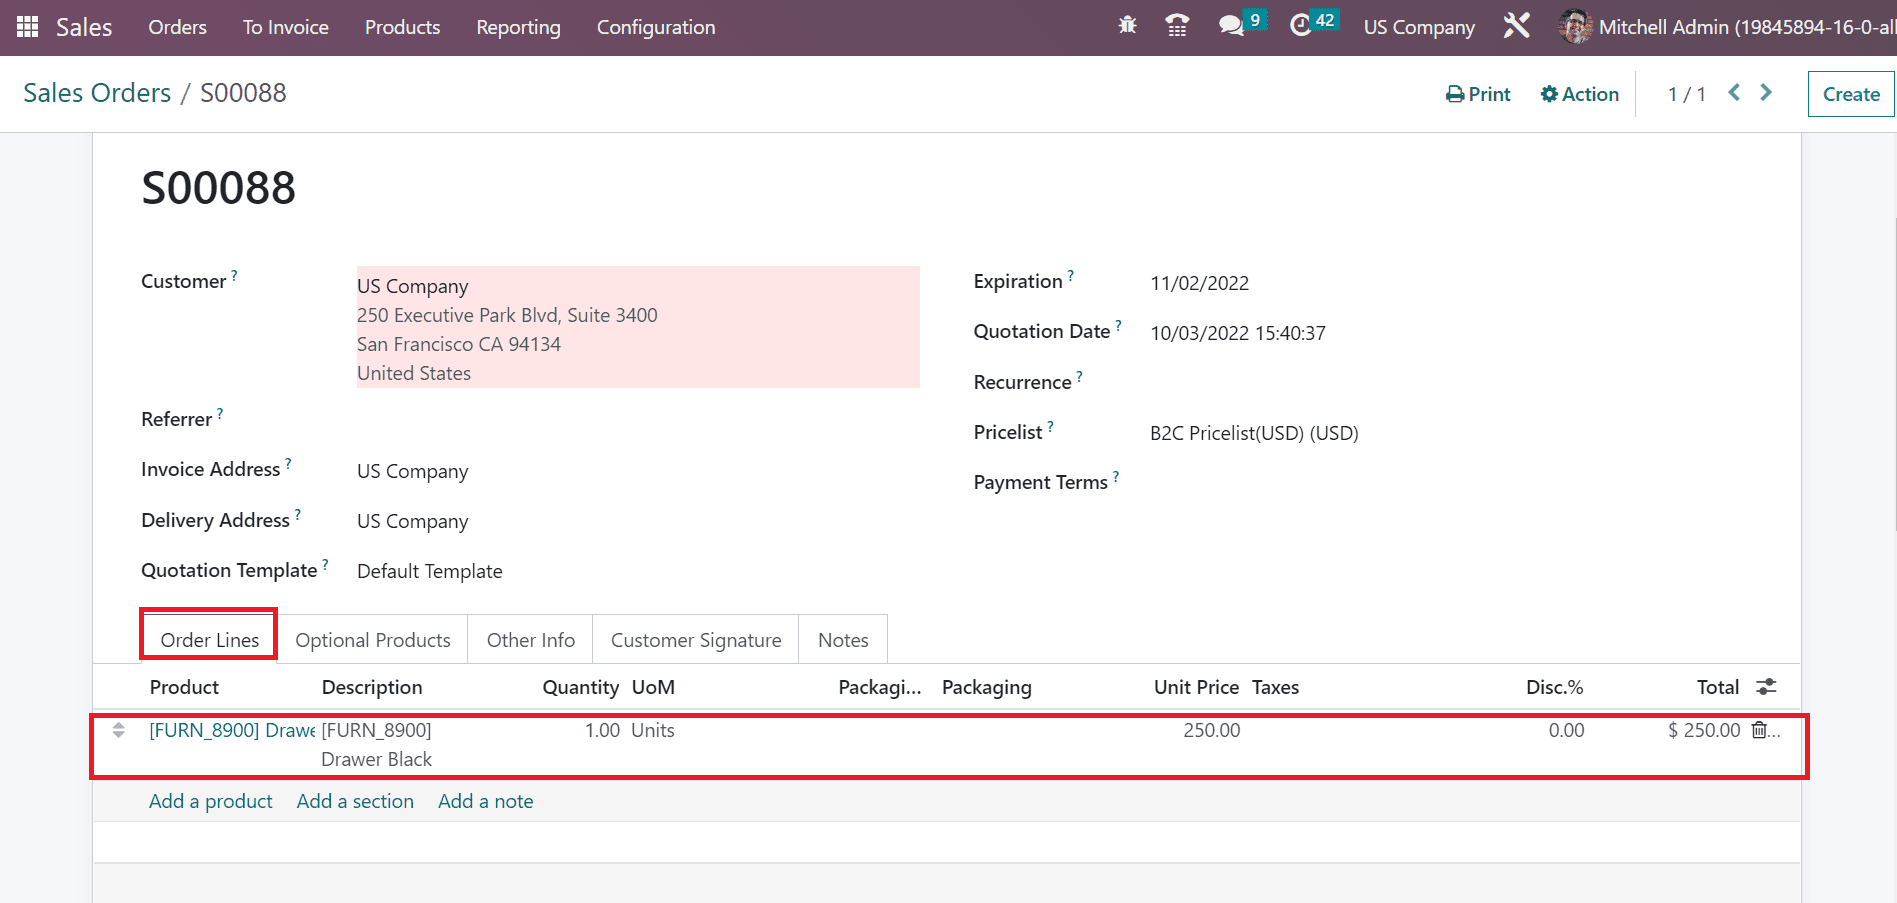 How to Manage Tax Excluded & Tax Included in Odoo 16 Accounting?-cybrosys